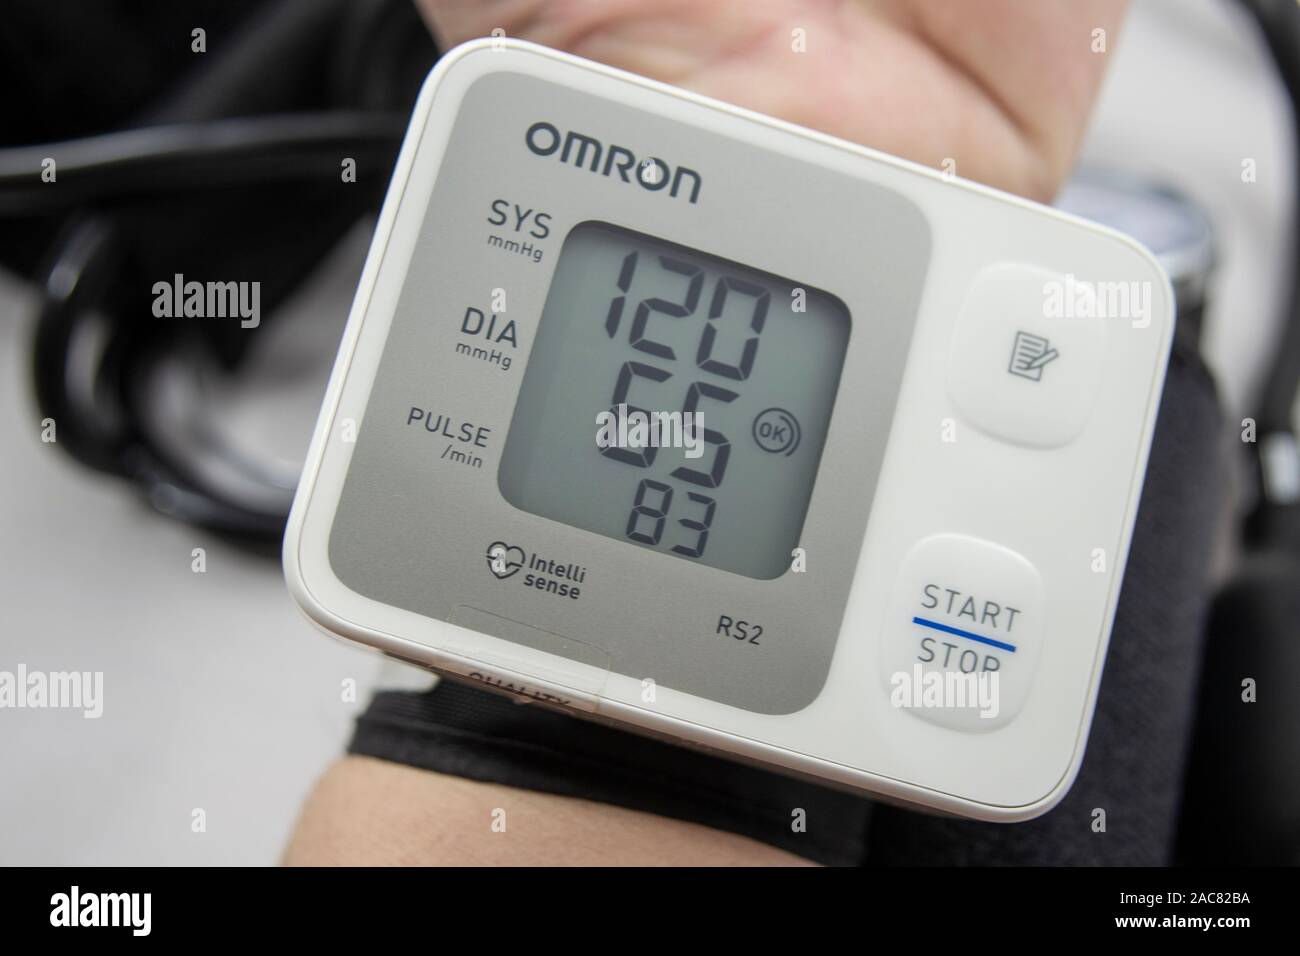 https://c8.alamy.com/comp/2AC82BA/wrist-blood-pressure-monitor-medical-device-for-measuring-blood-pressure-and-heart-rate-used-at-hand-wrist-and-showing-optimal-blood-pressure-2AC82BA.jpg